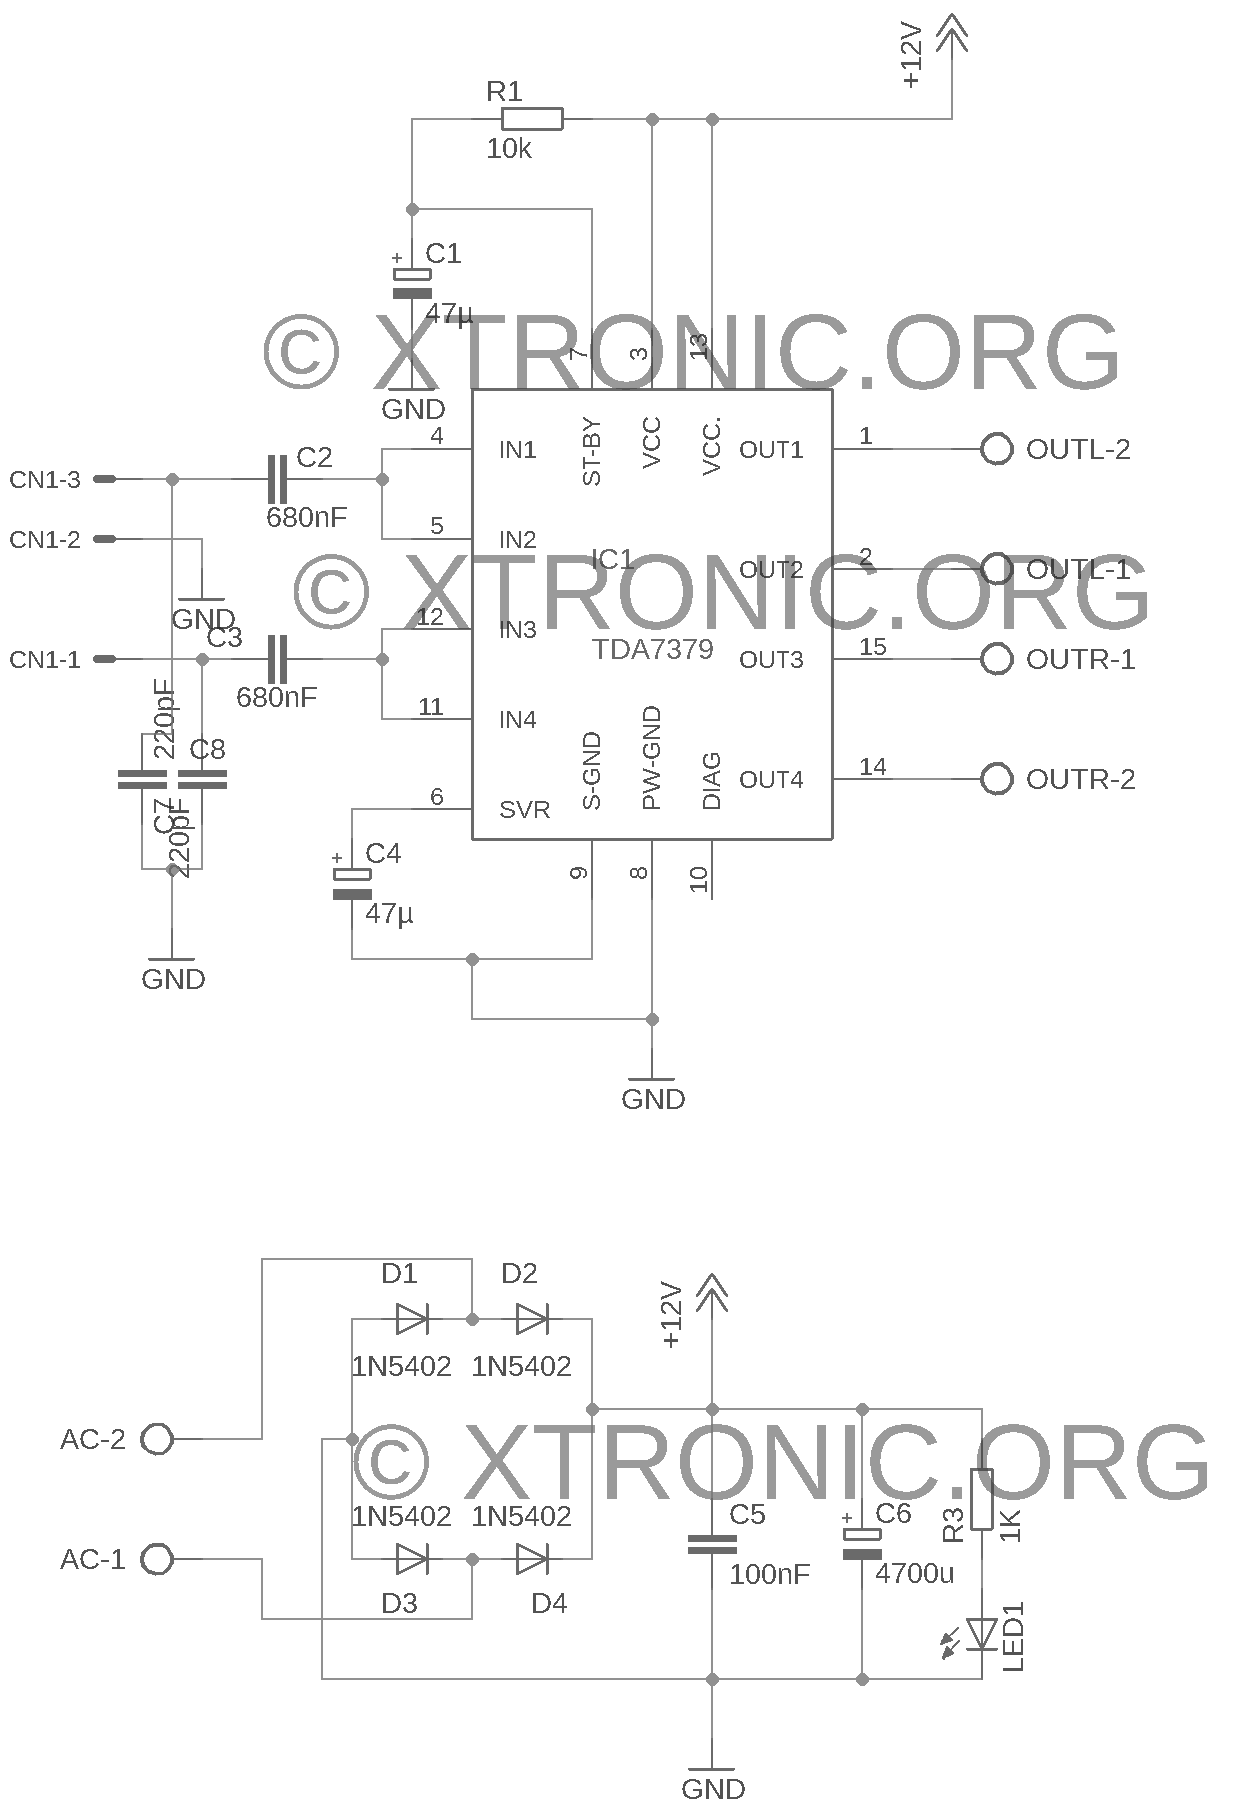 Circuit stereo power amplifier IC TDA7379 38W - Xtronic.org